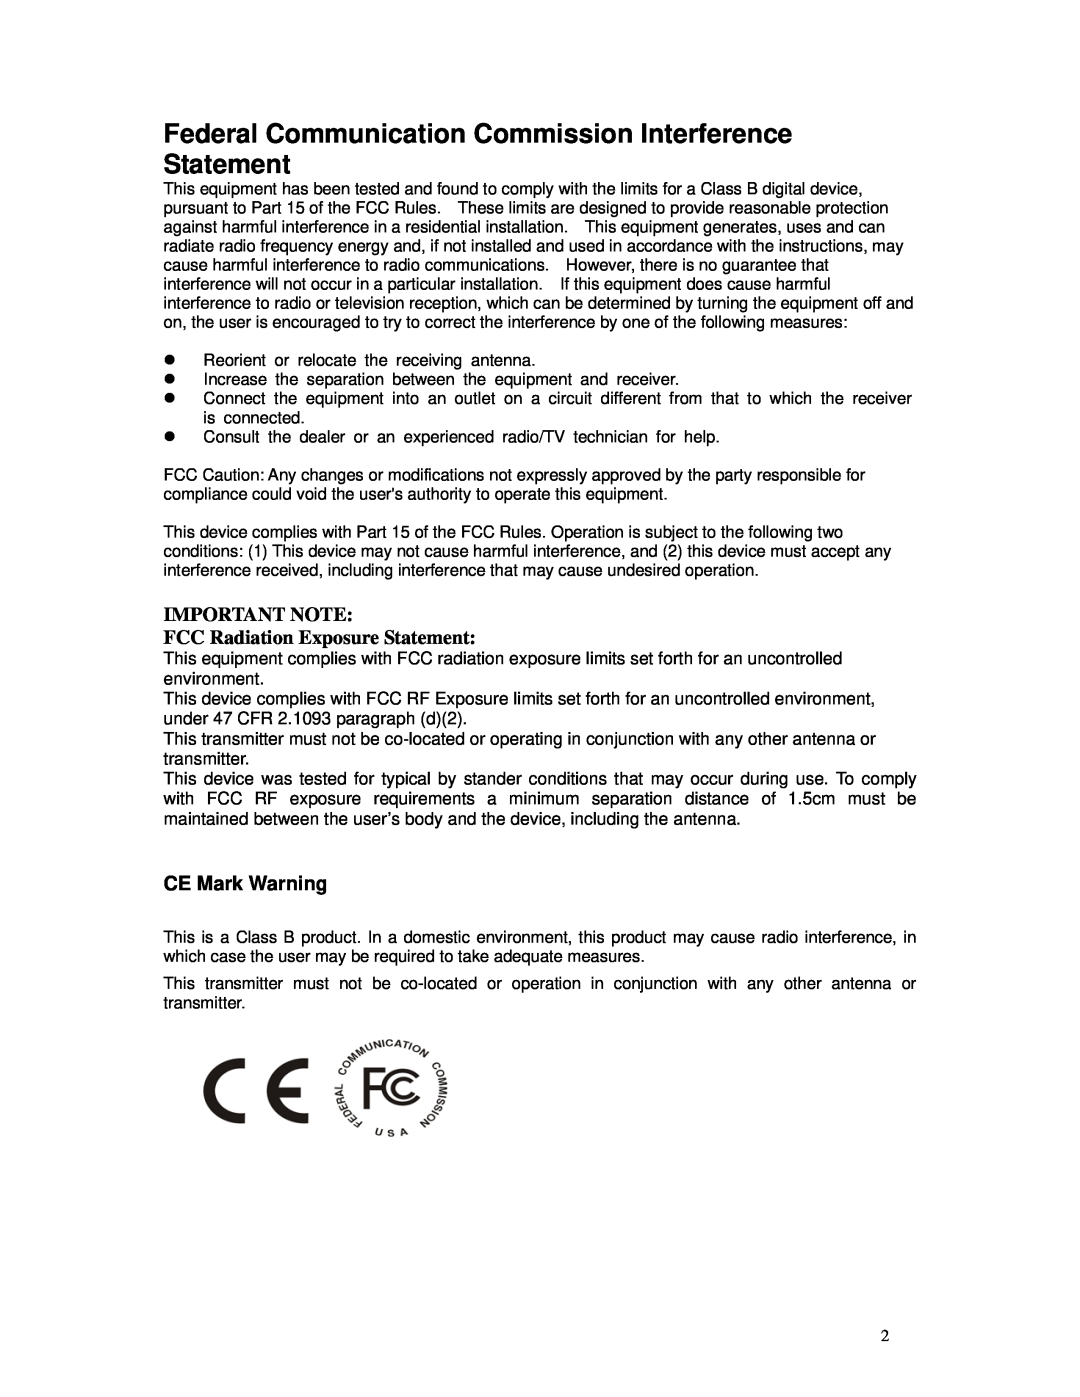 TRENDnet TEW-509UB manual CE Mark Warning, Federal Communication Commission Interference Statement 